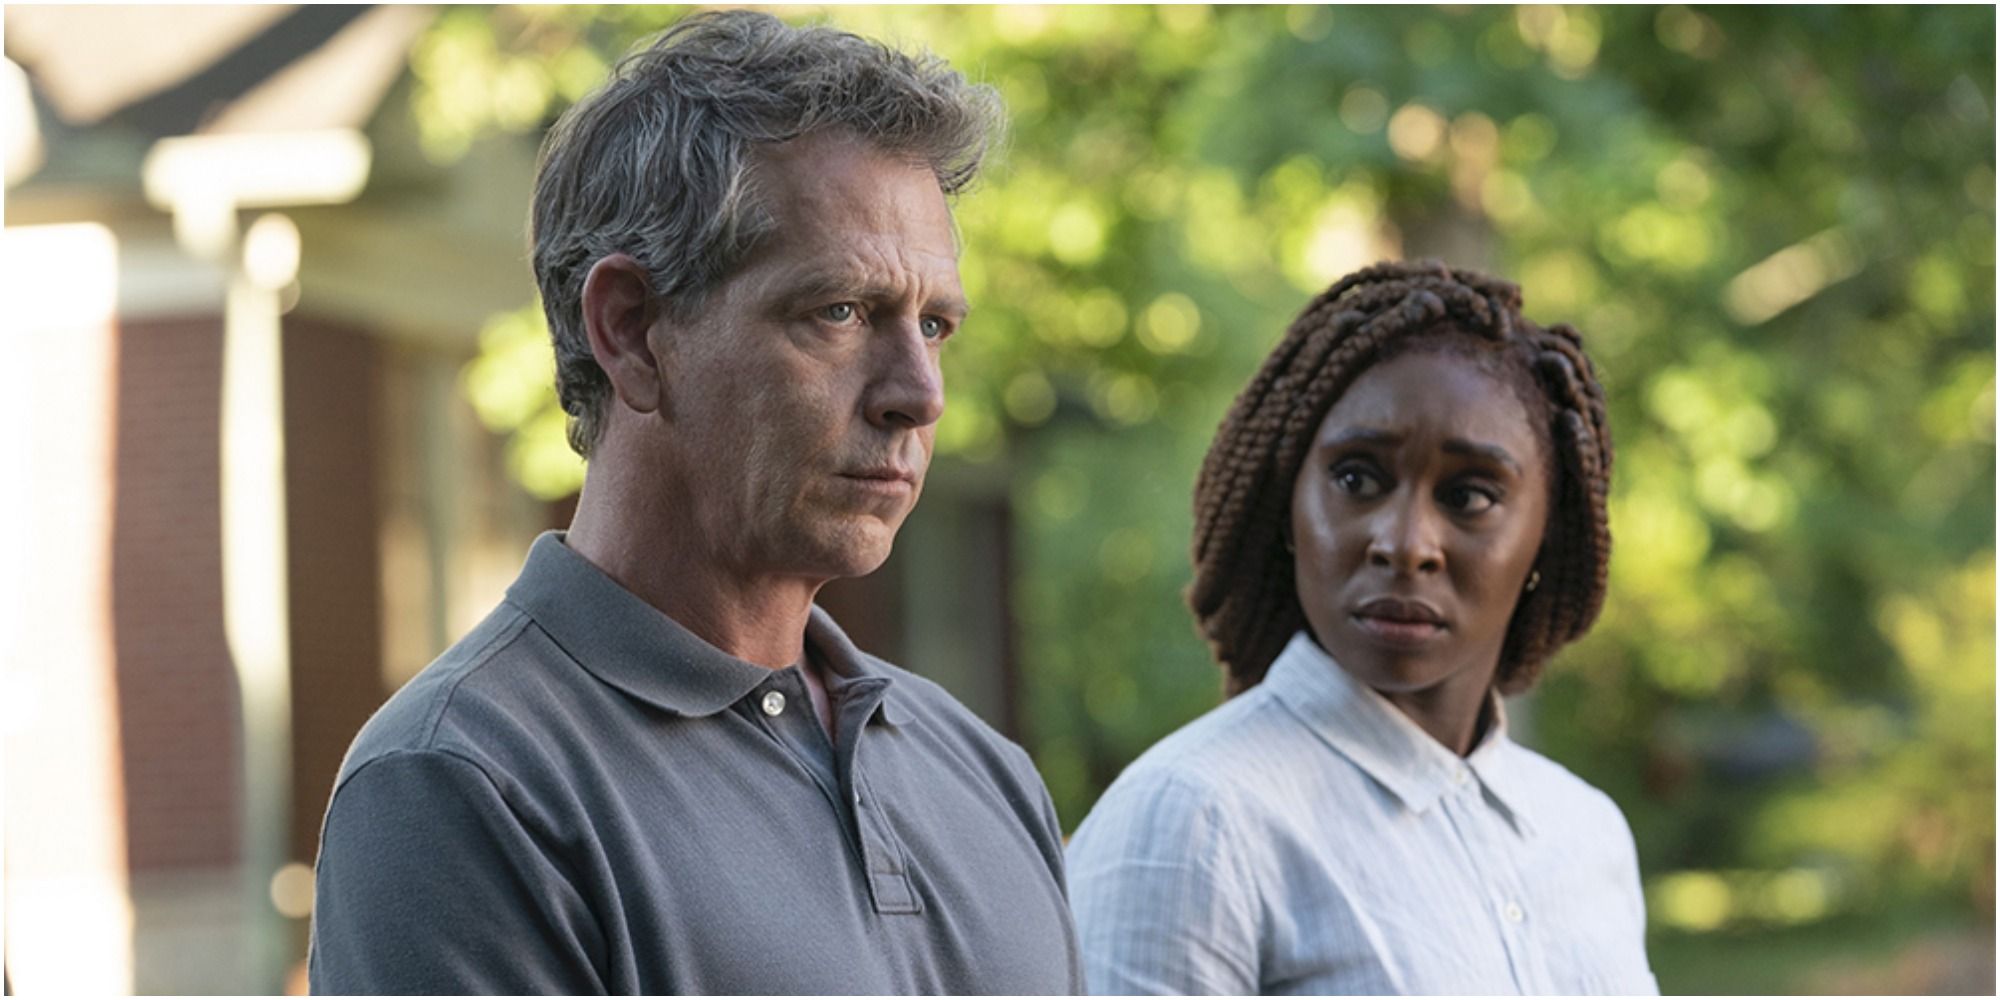 Ben Mendelsohn as Detective Ralph Anderson and Cynthia Erivo as Holly Gibney in The Outsider